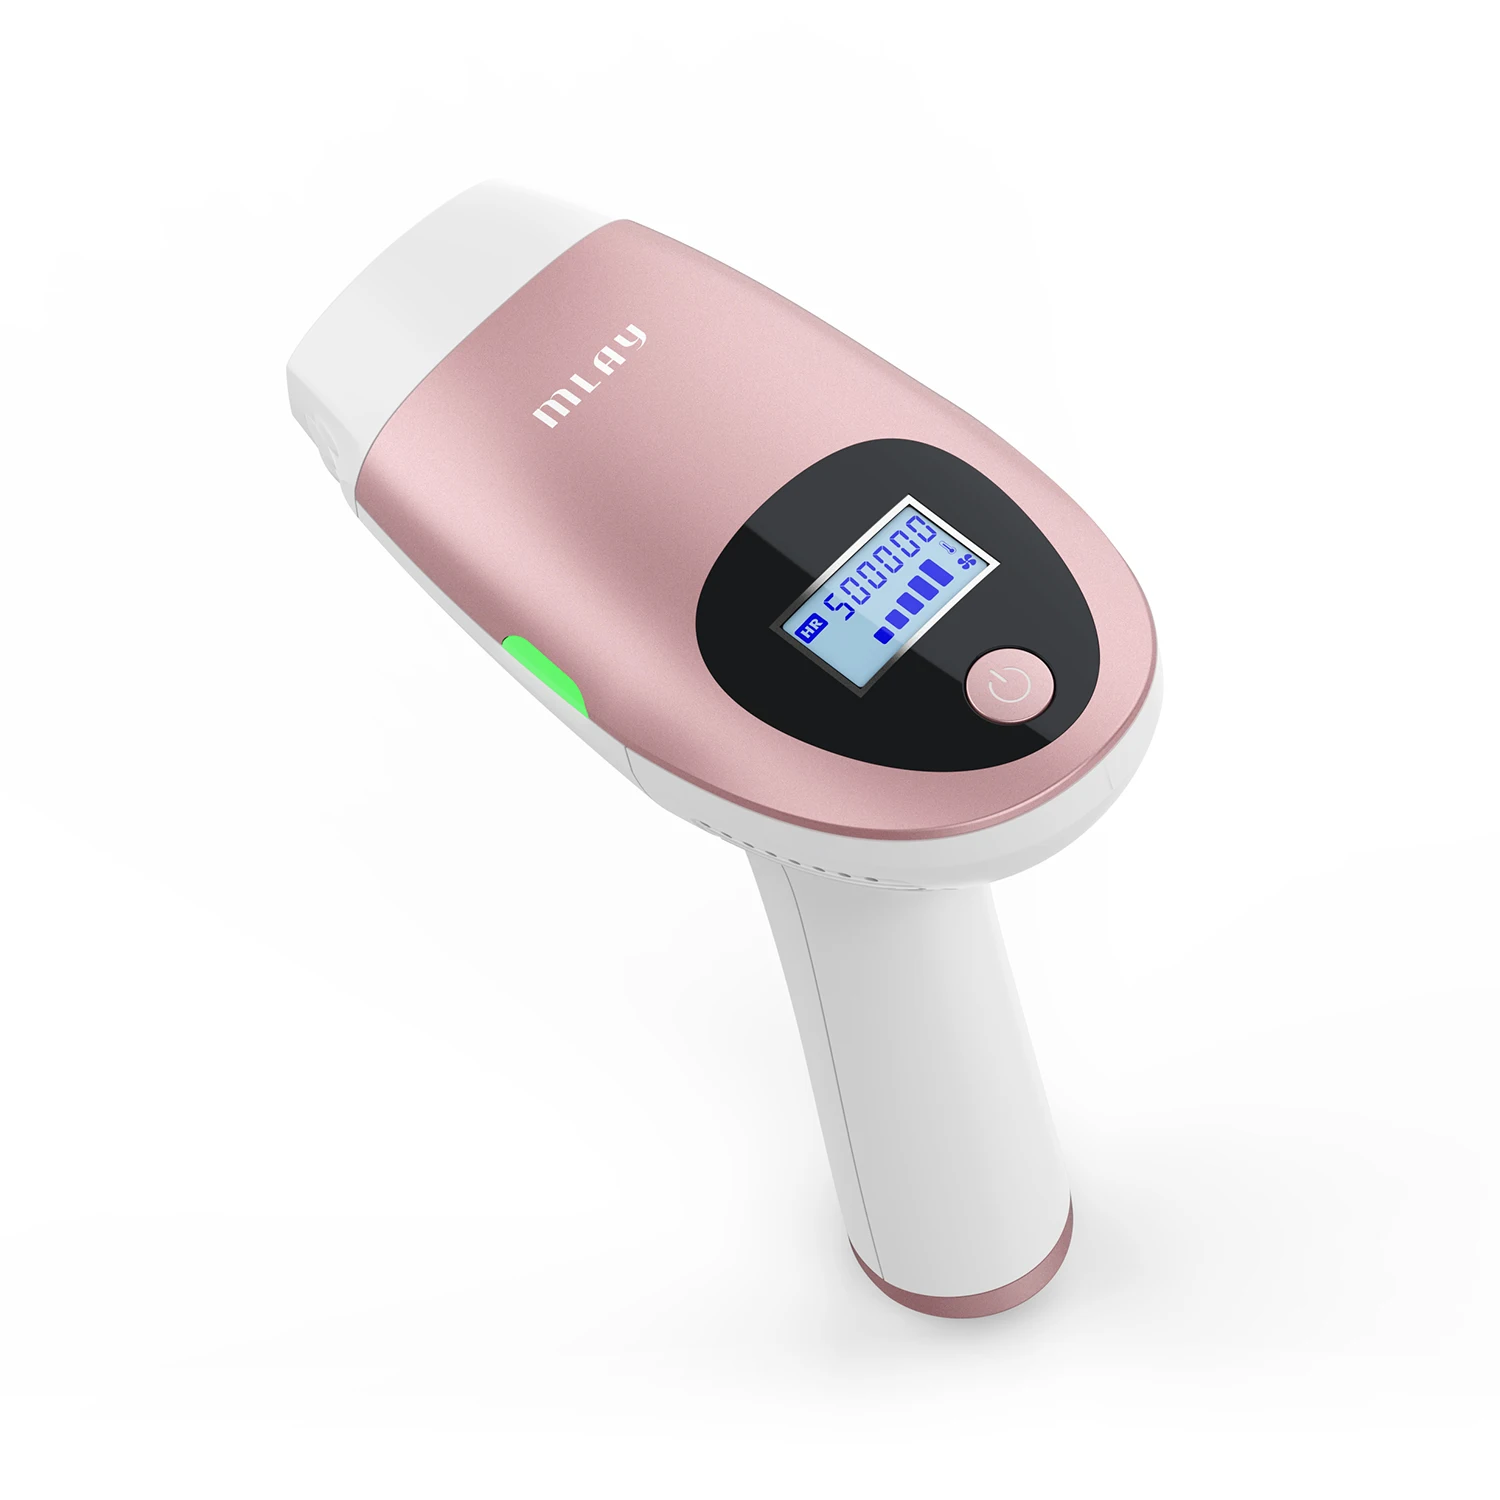 MLAY T3 Handheld IPL Hair removal device Portable home use professional triple functions hair removal machine